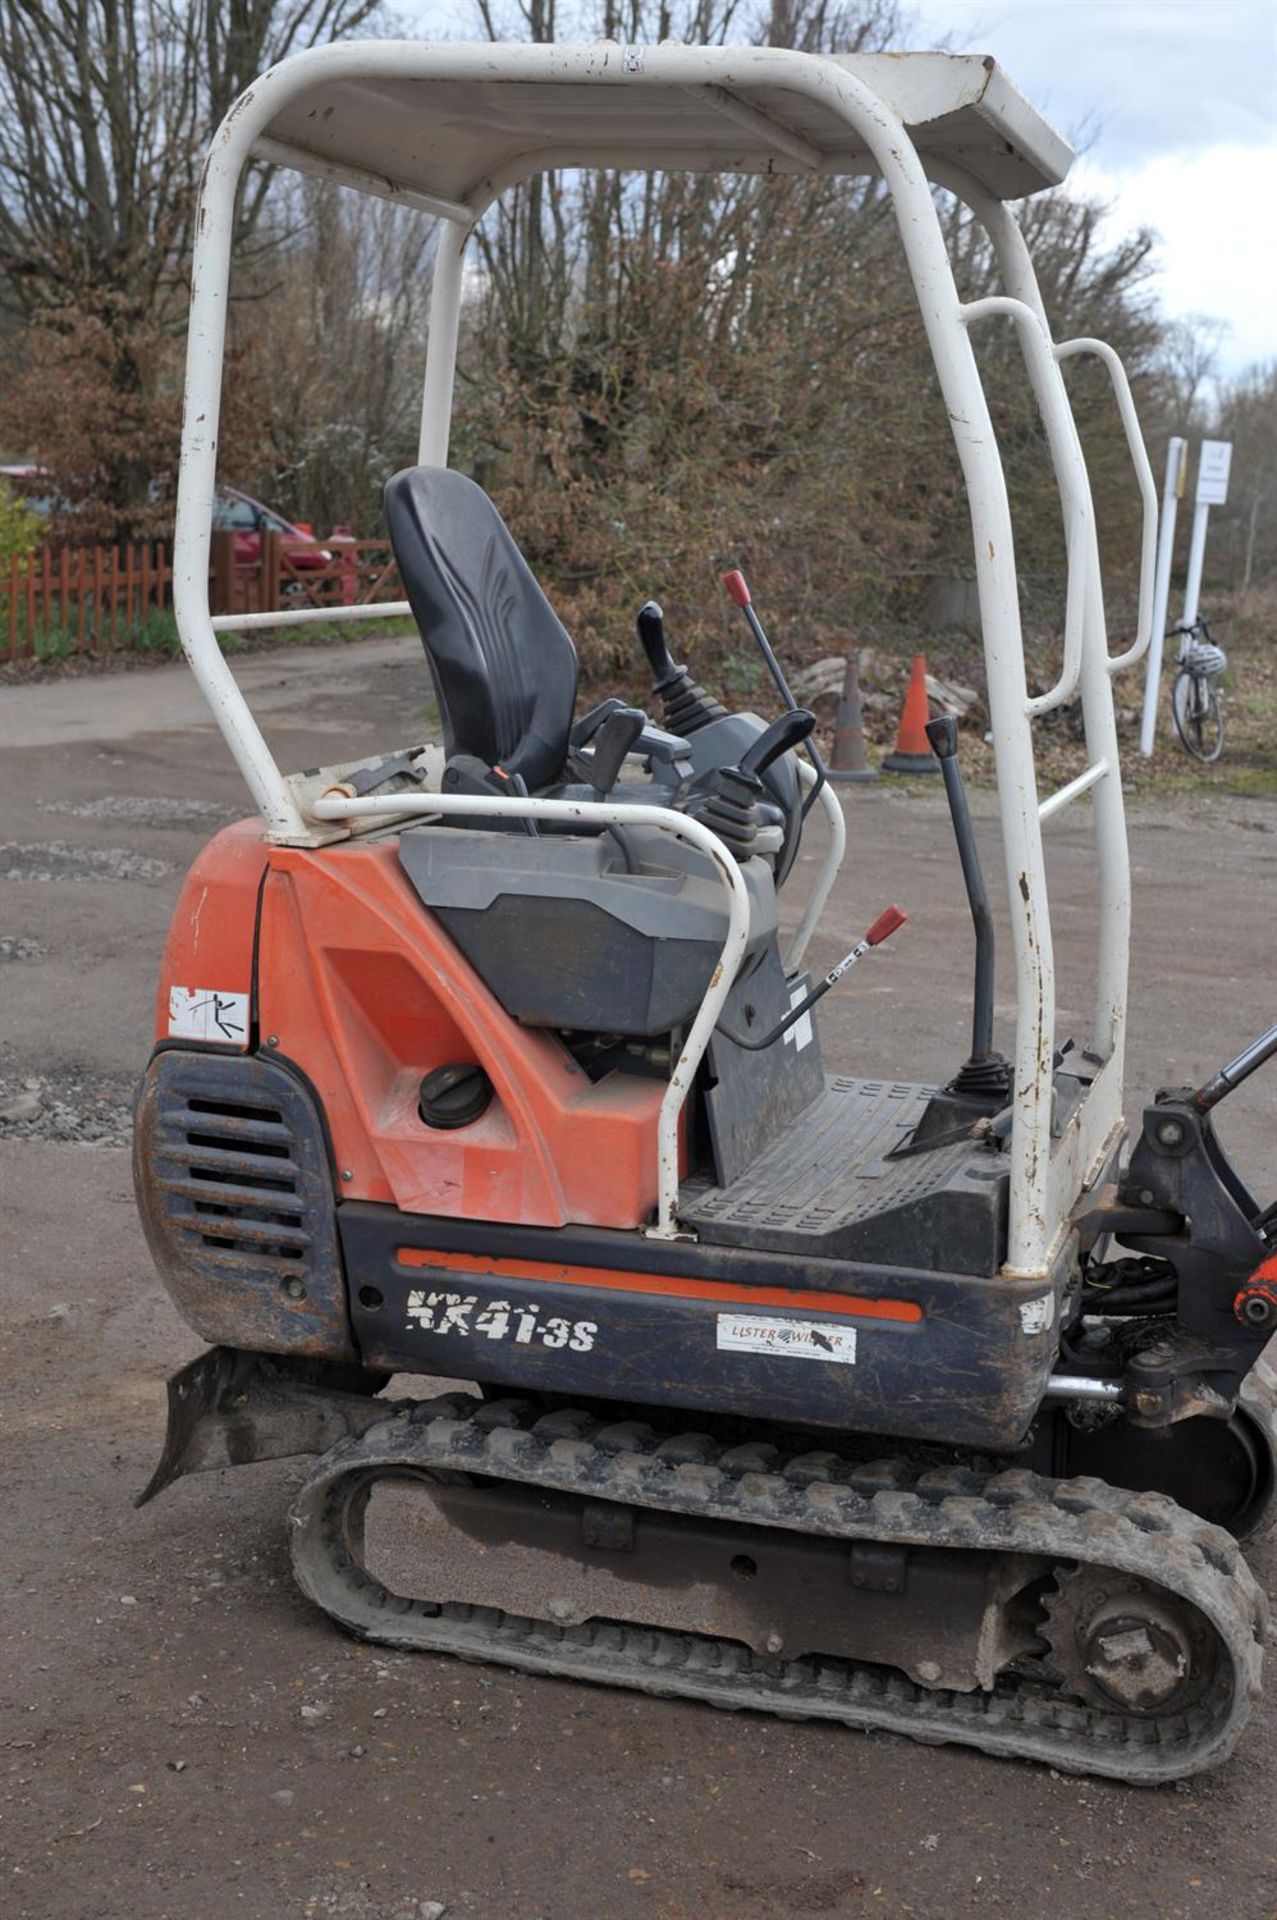 Kubota 1.5 ton digger KX413S. This mini digger comes in working order with its 3 digger buckets it - Image 8 of 10